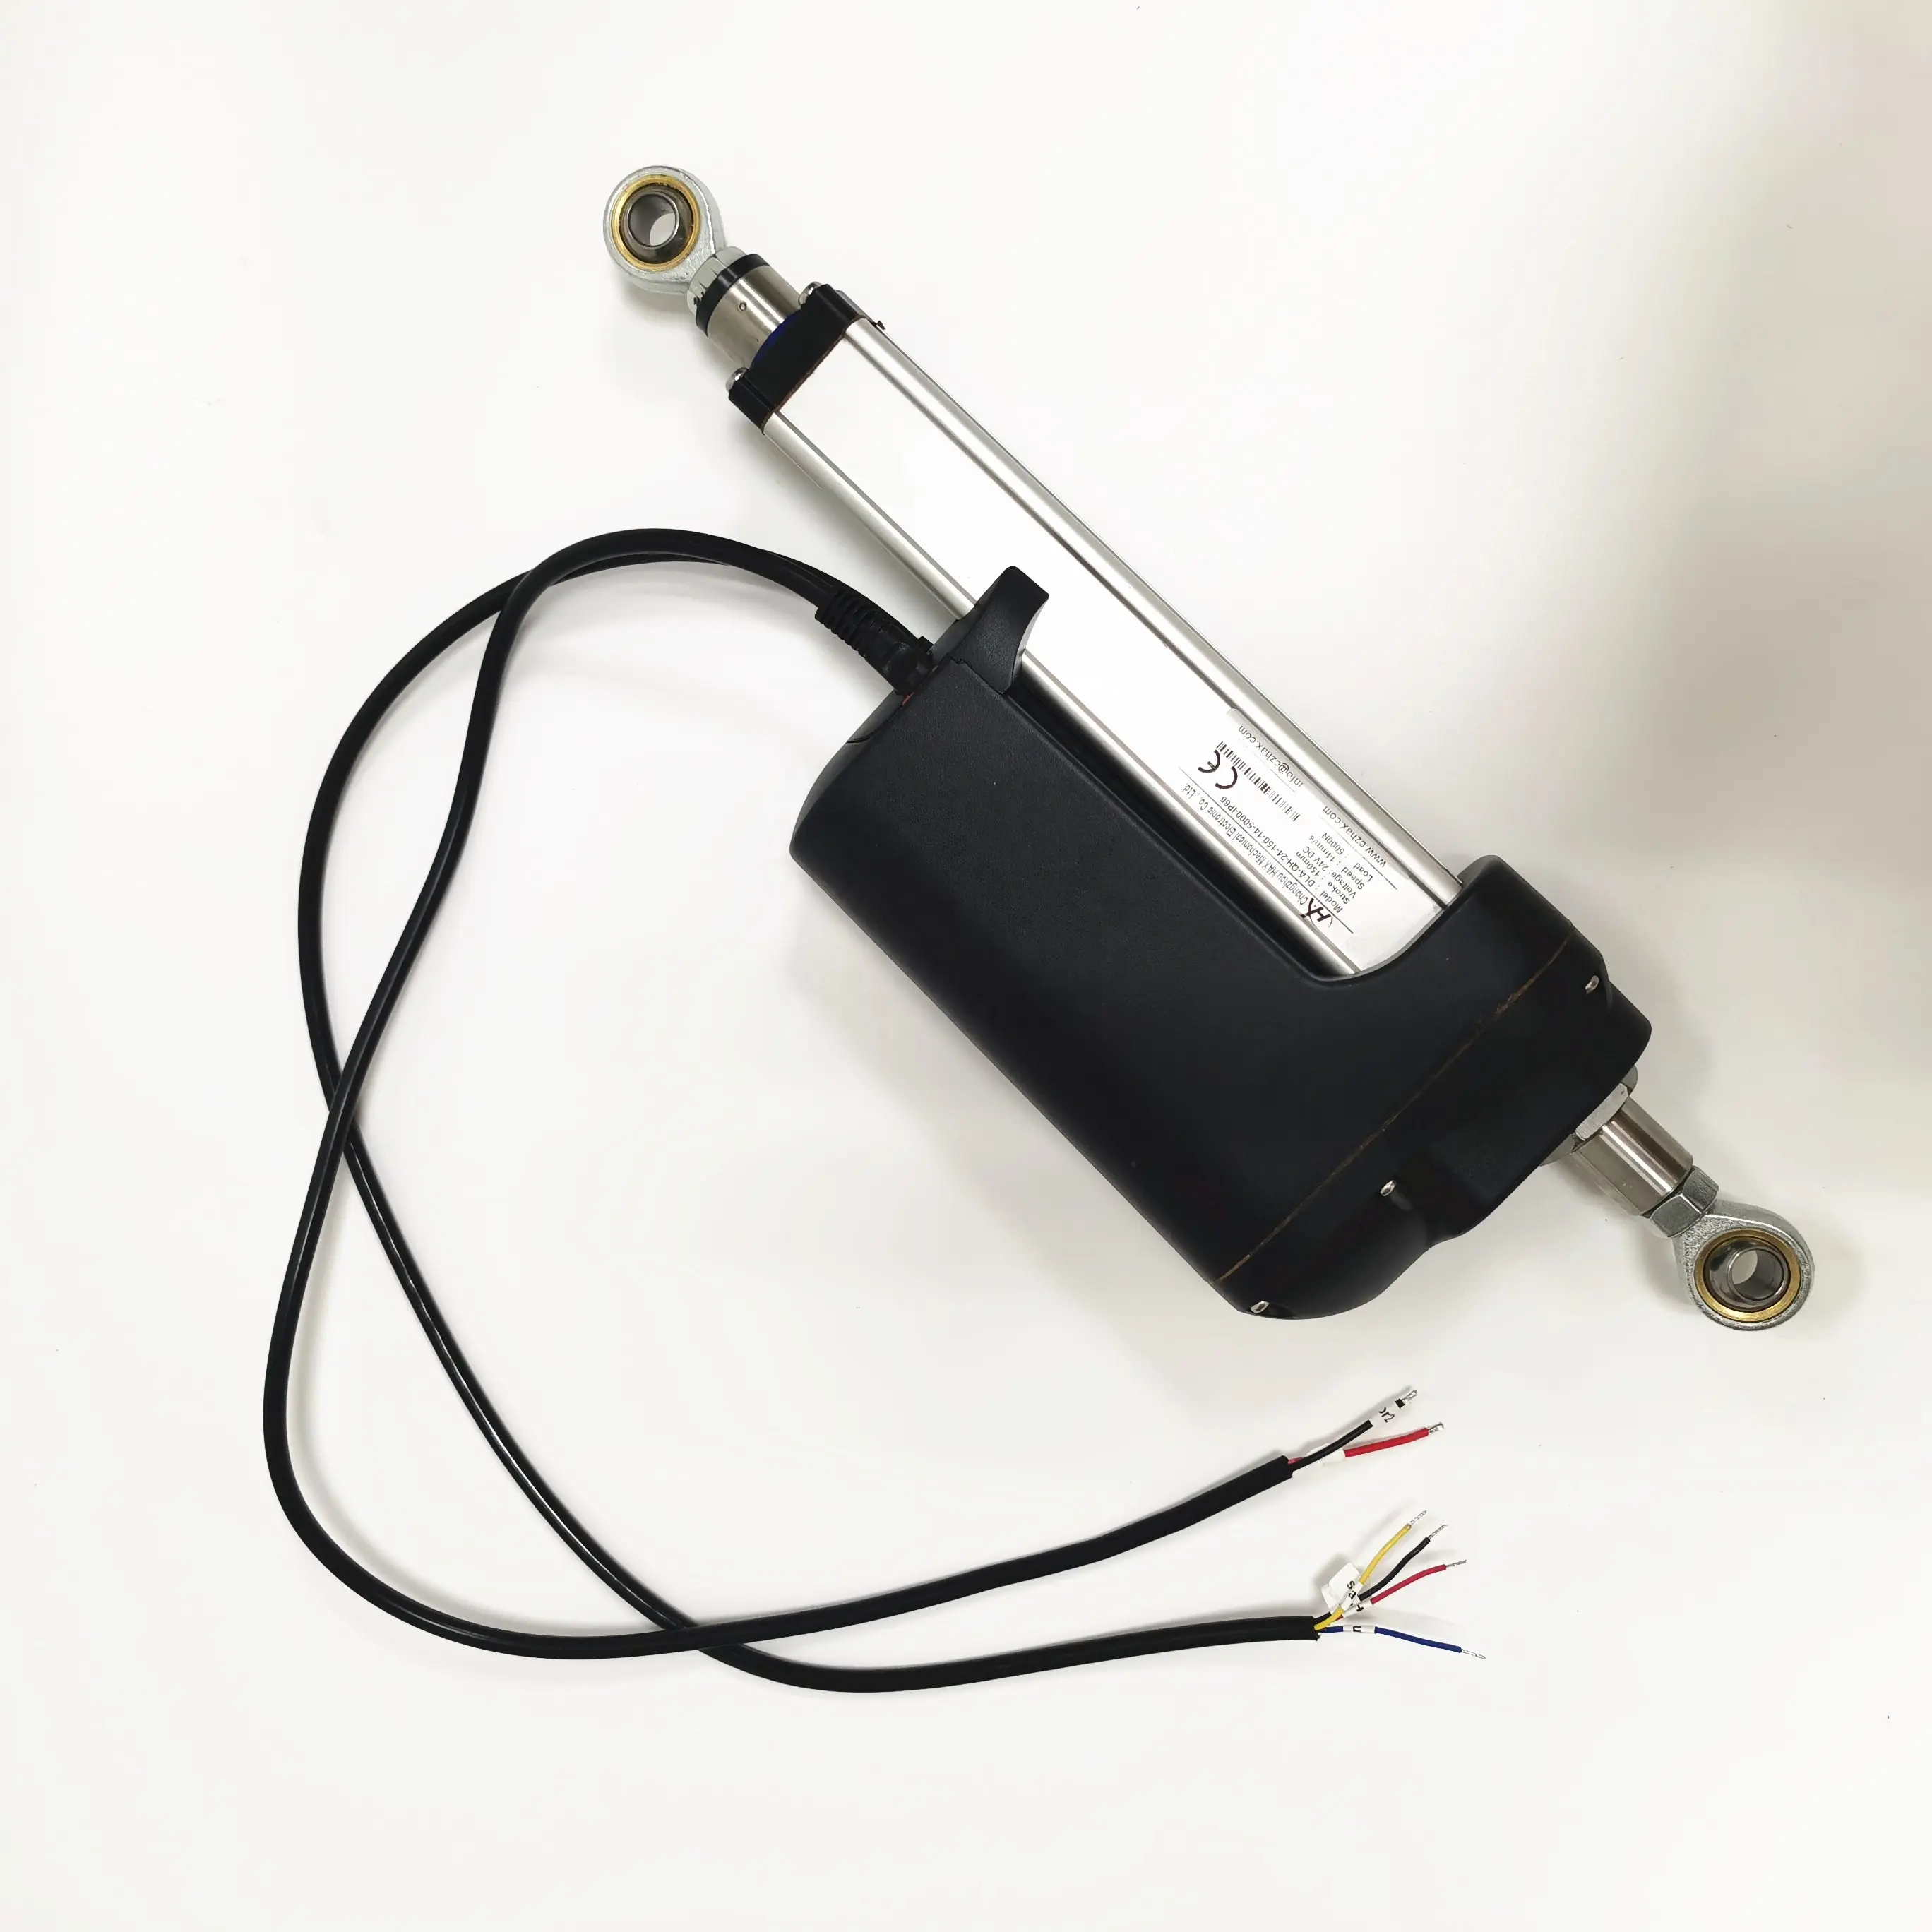 micro linear actuator 12v dc motor IP67 waterproof for boat marine